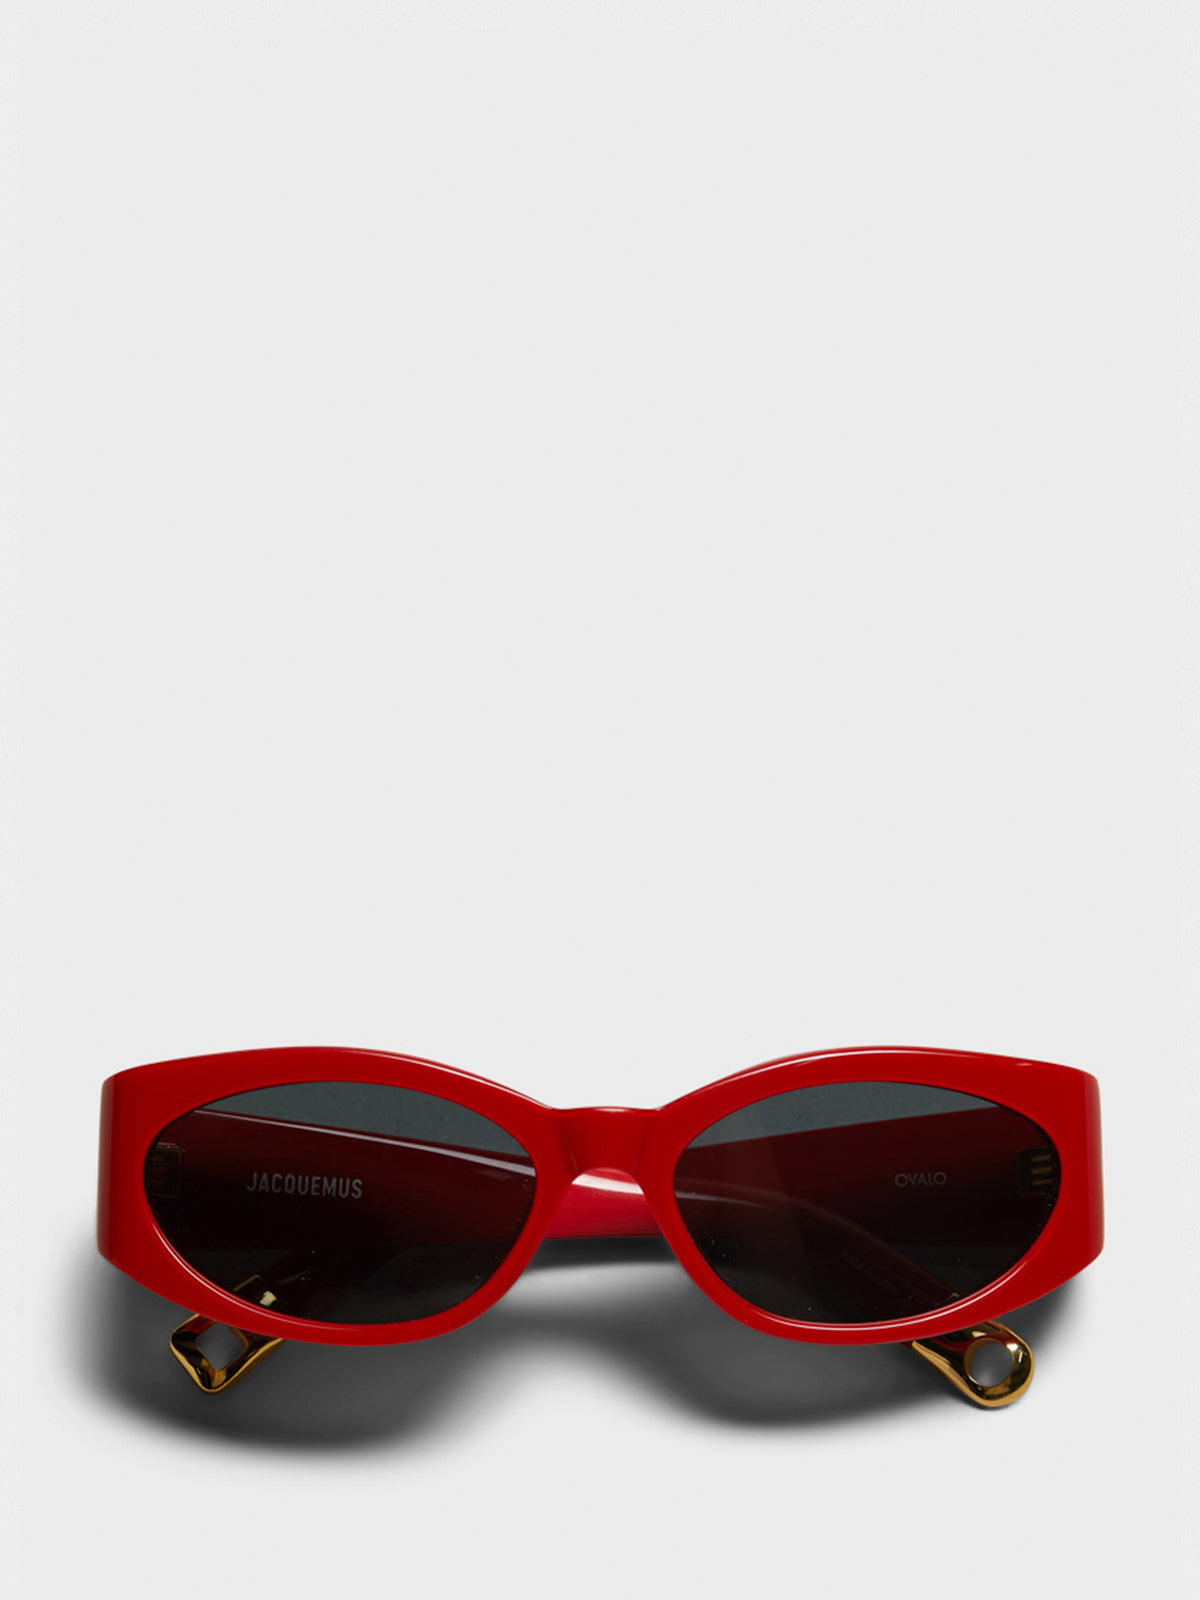 Ovalo Sunglasses in Red, Yellow Gold and Grey